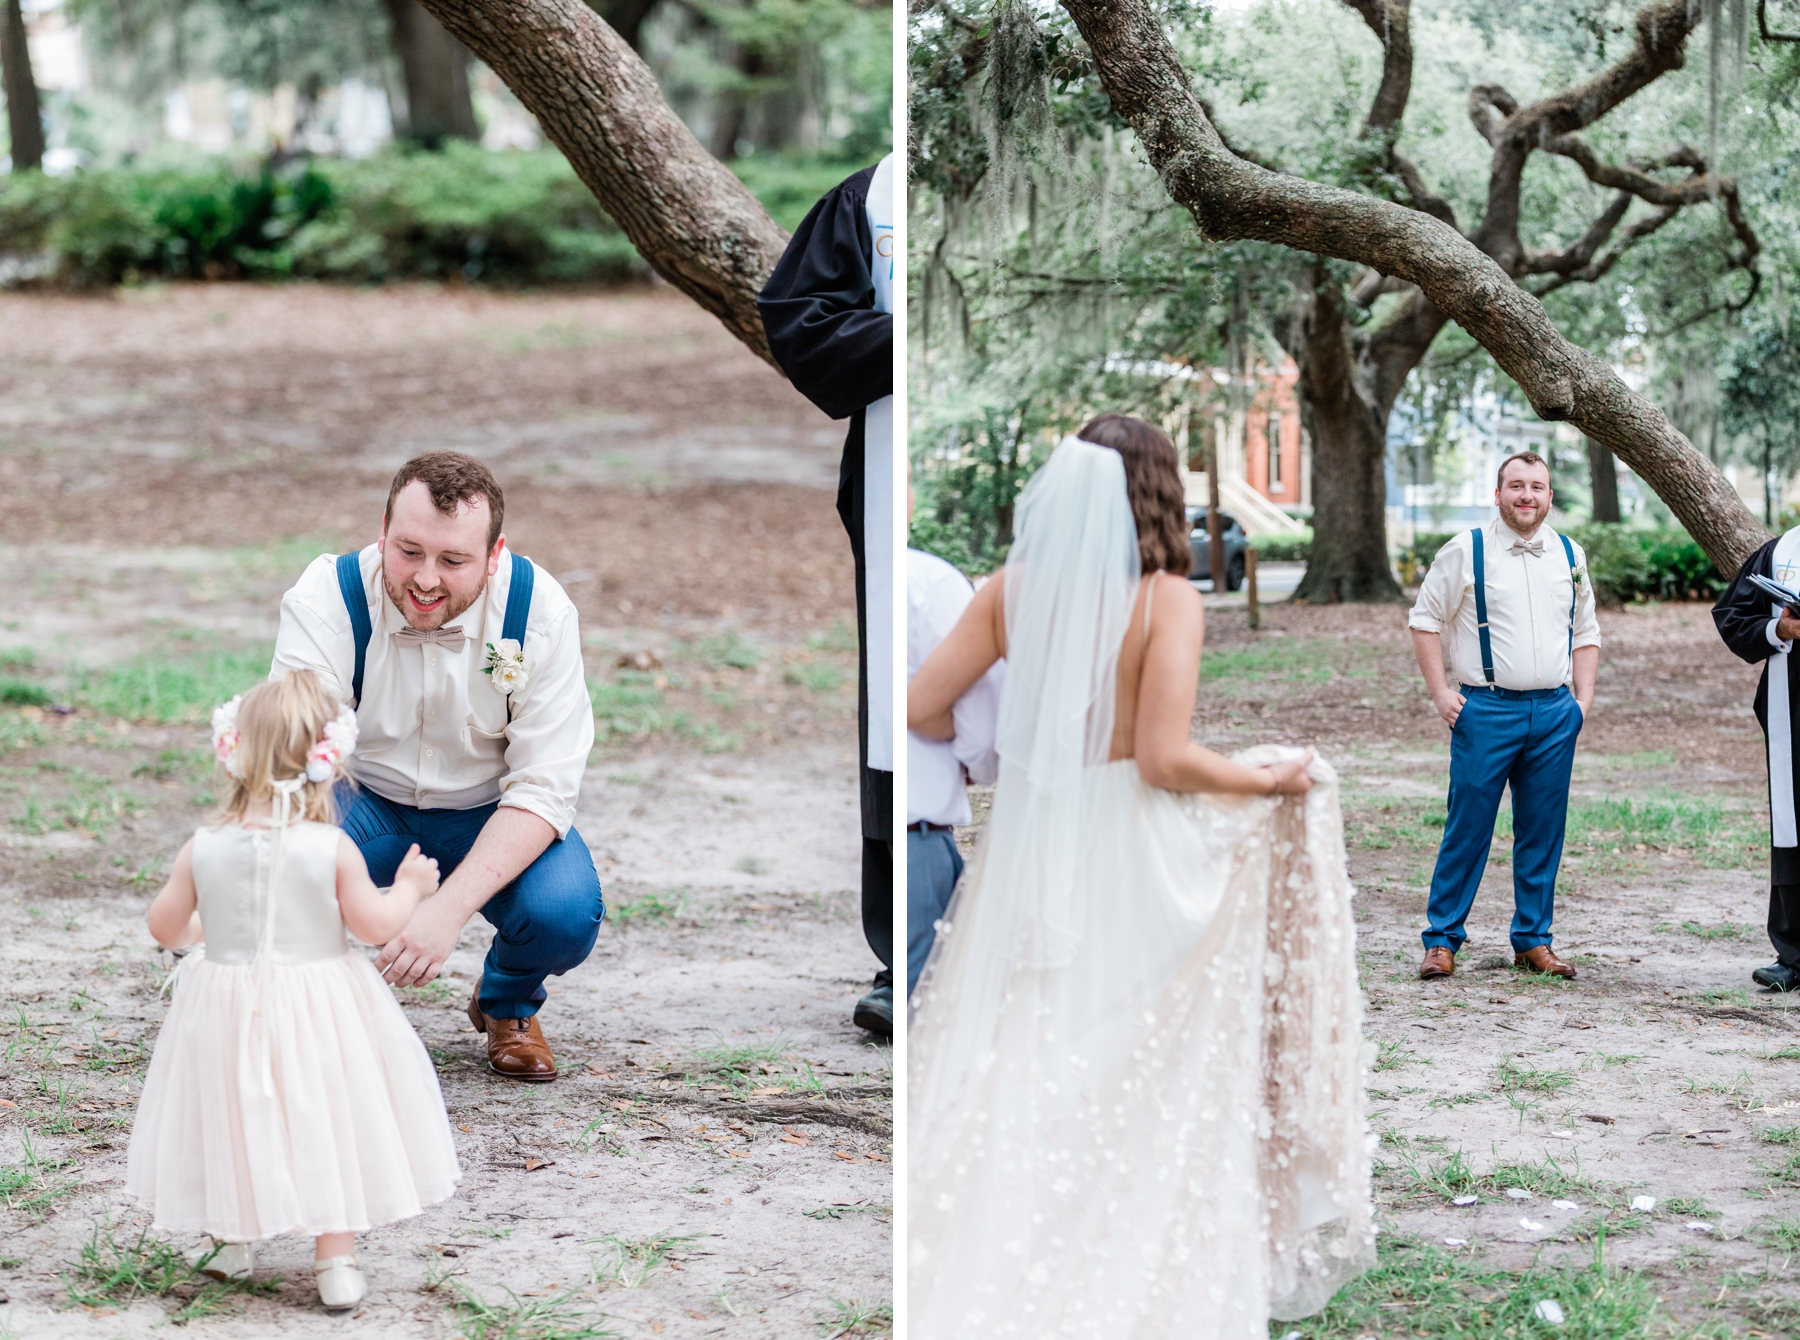 Marissa and Cody’s elopement in Forsyth Park by The Savannah Elopement Package